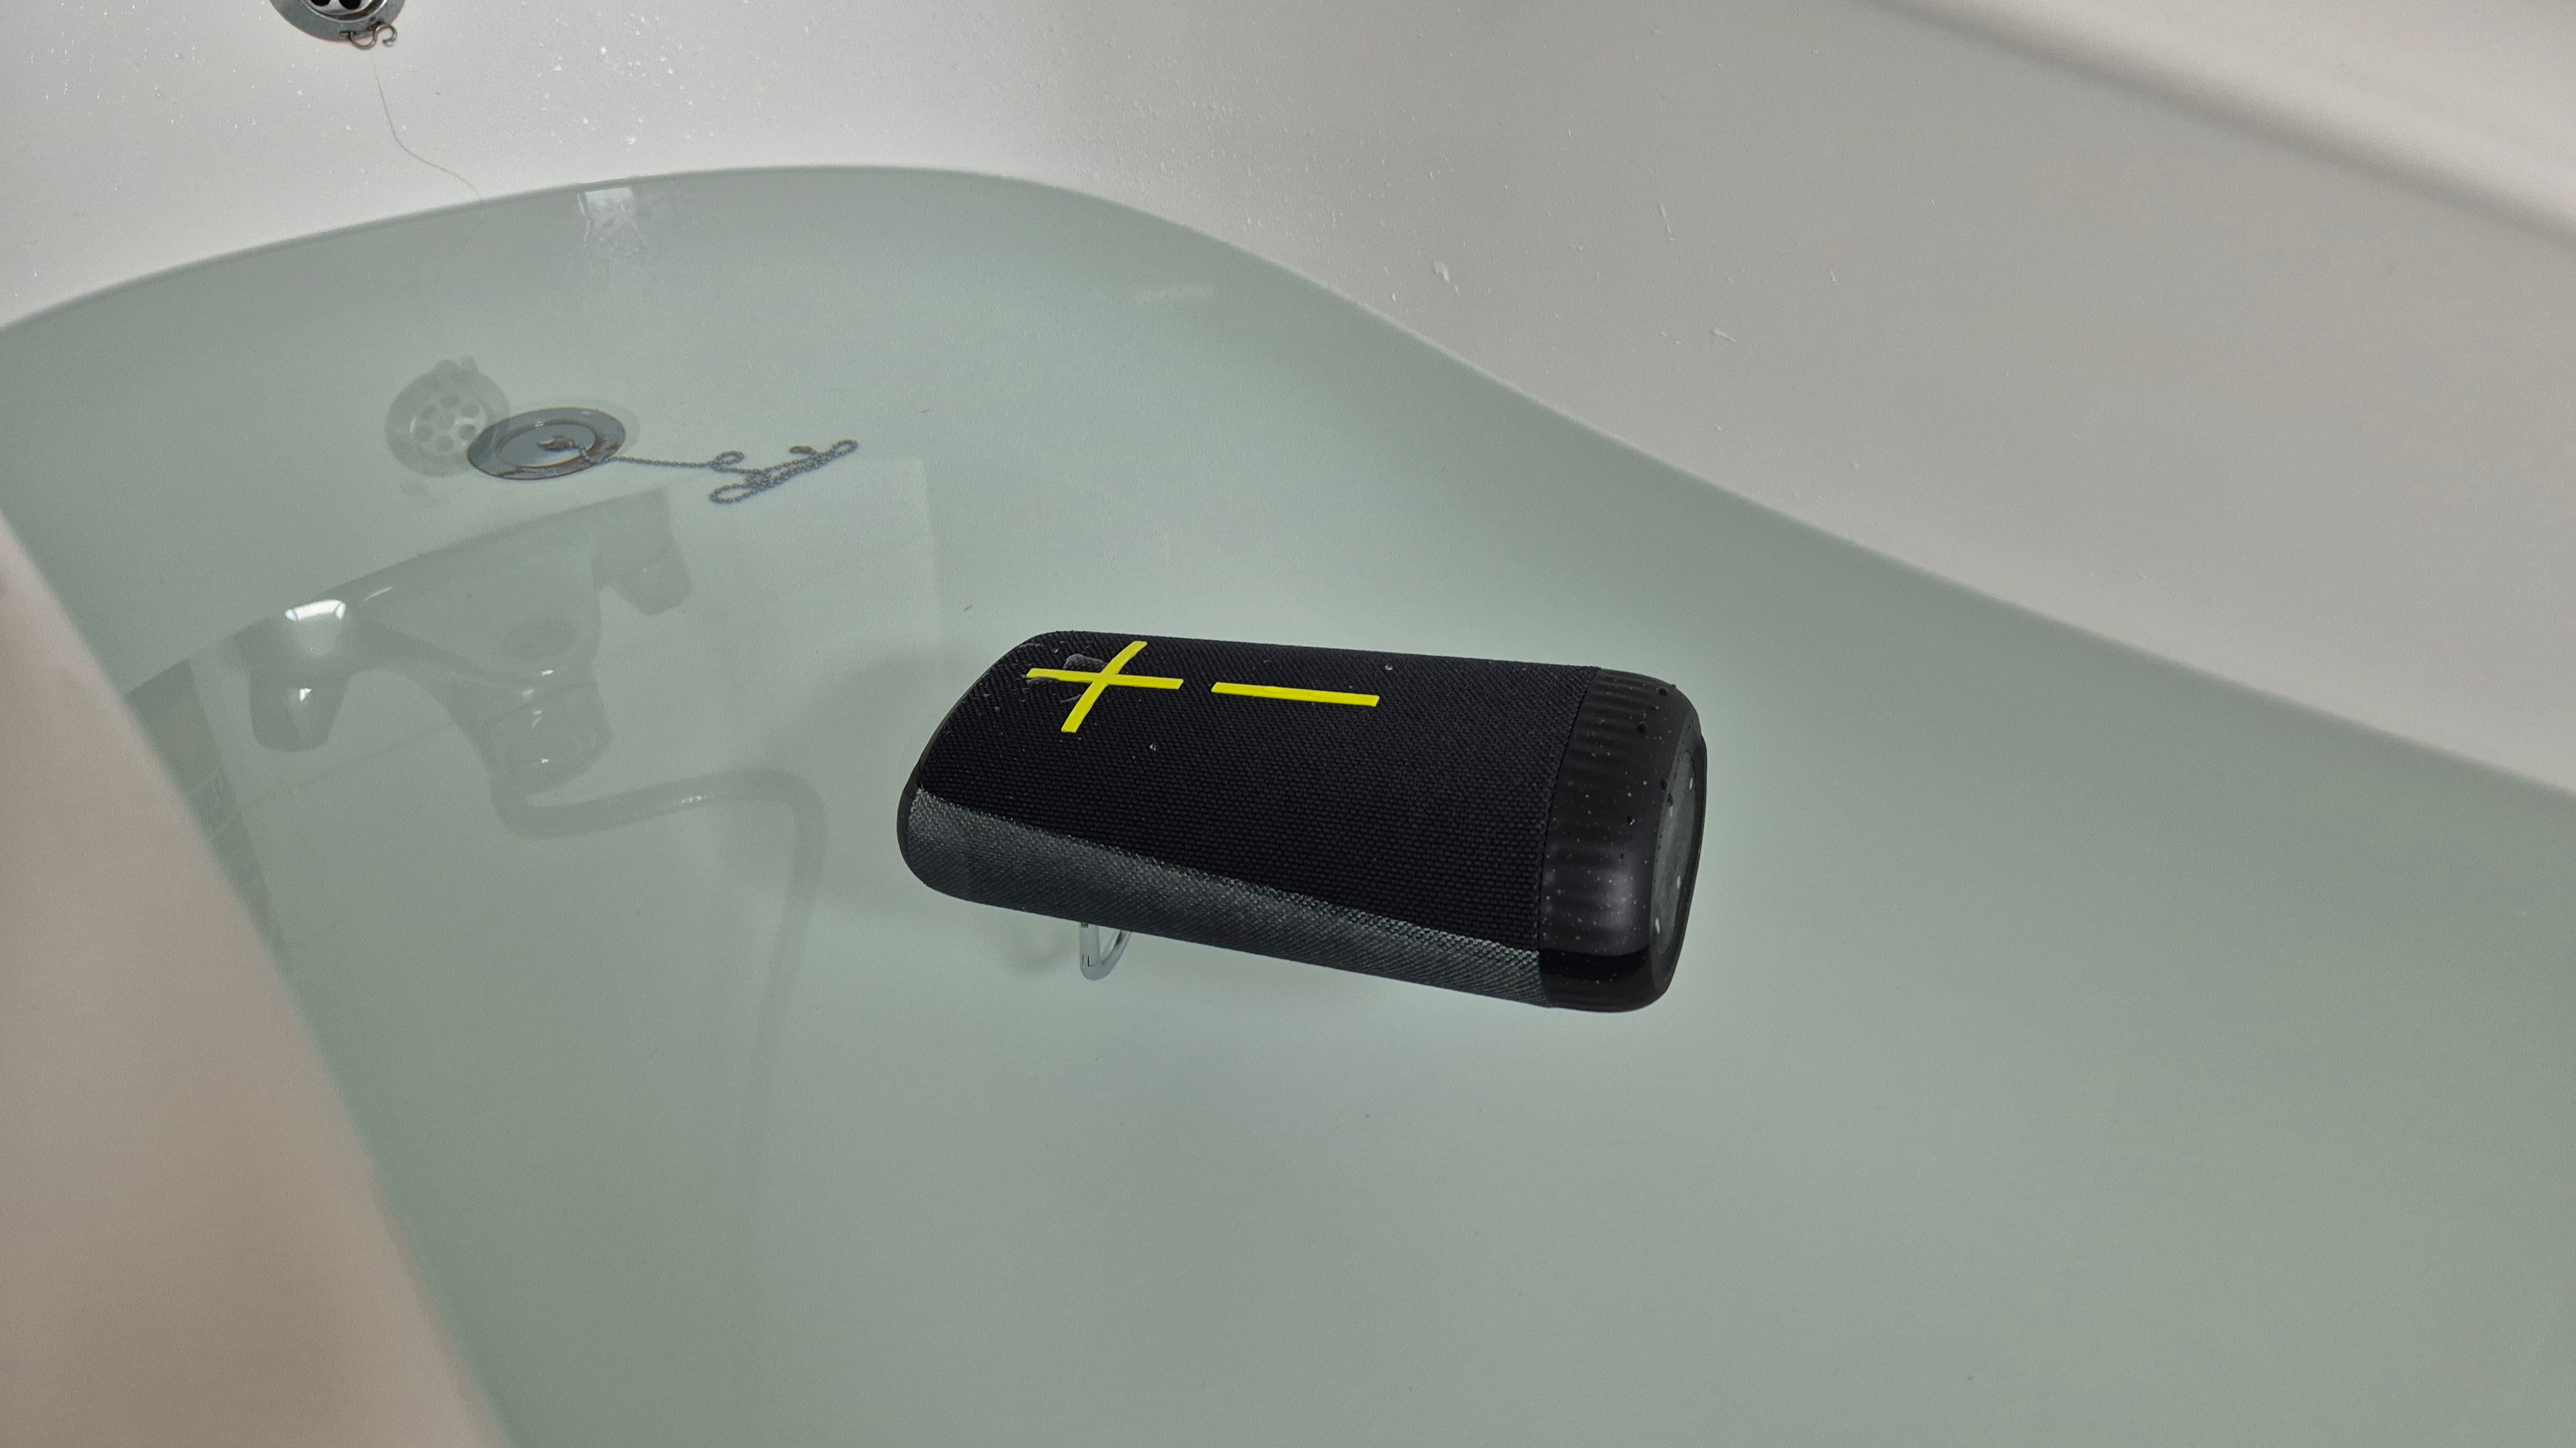 The Ultimate Ears Everboom floating in a bath